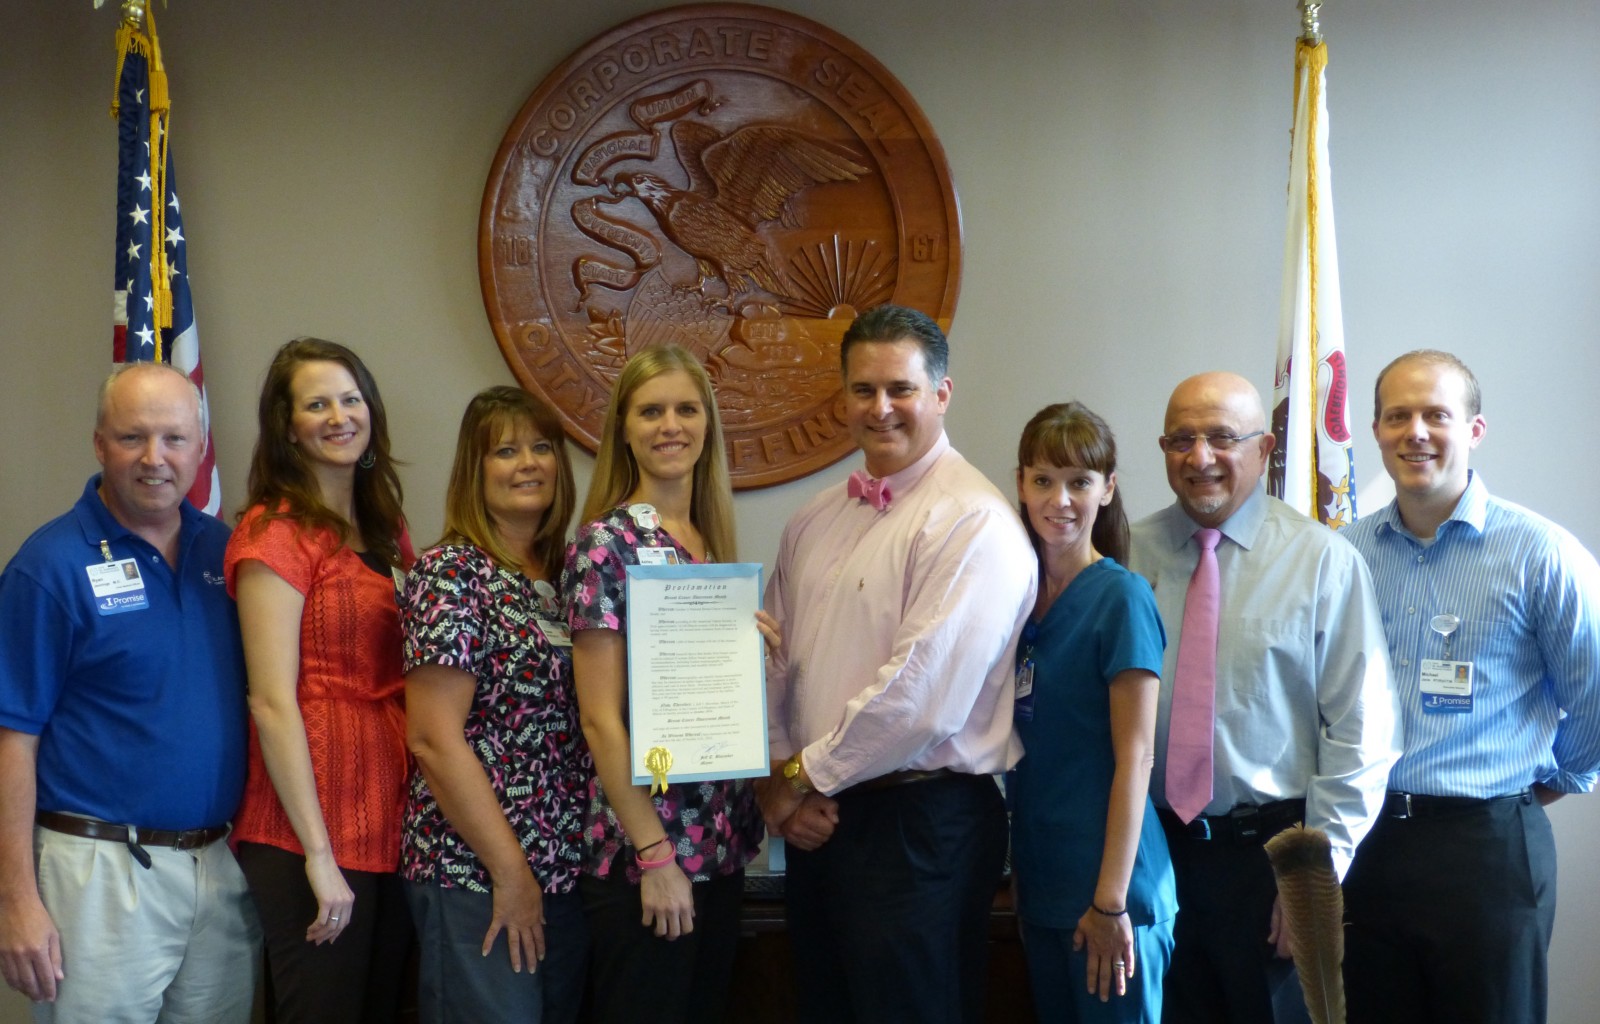 Effingham Mayor Jeff T. Bloemker, fourth from right, signed a proclamation designating October 2016 as Breast Cancer Awareness Month.  Joining the Mayor for the signing from HSHS St. Anthony’s Memorial Hospital were, standing left to right, Dr. Ryan Jennings, Chief Medical Officer; Jill Navarro, Cancer Program Specialist; Susan Koontz Women’s Wellness Center Facilitator; Ashley Davis, Women’s Wellness Center Nurse Navigator; Mayor Bloemker; Kelly Sager, Chief Nursing Officer, Dr. Ruben Boyajian, Medical Director of Women’s Wellness and Cancer Care Services; and Mike Janis, Executive Director of Outpatient and Ancillary Services.